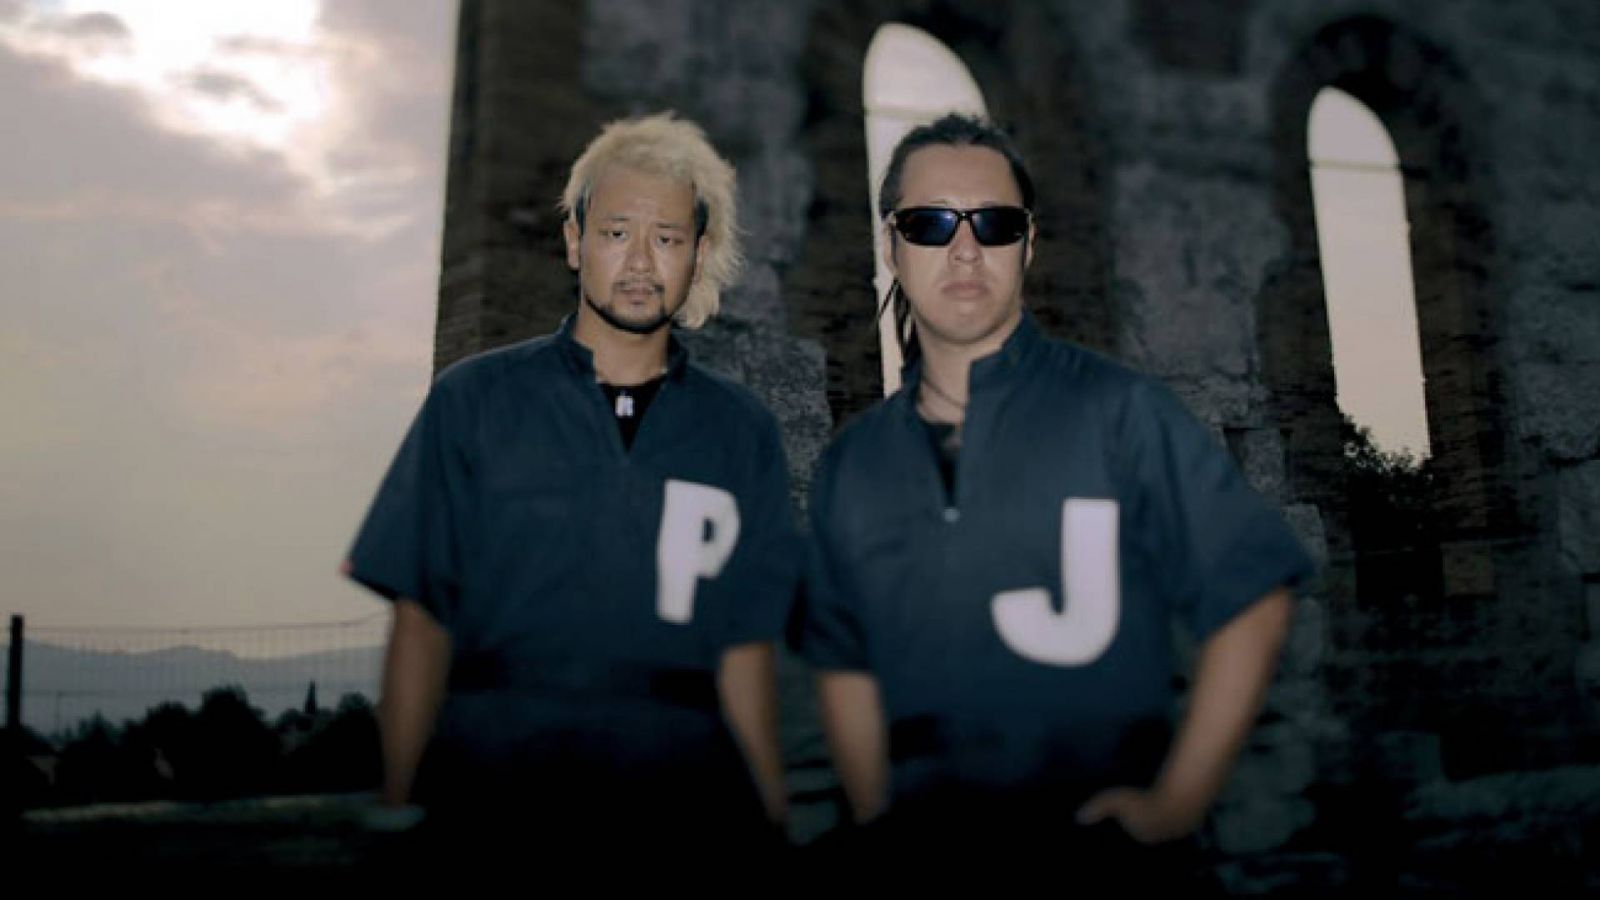 →Pia-no-jaC← to Release New Album © →Pia-no-jaC← All rights reserved.